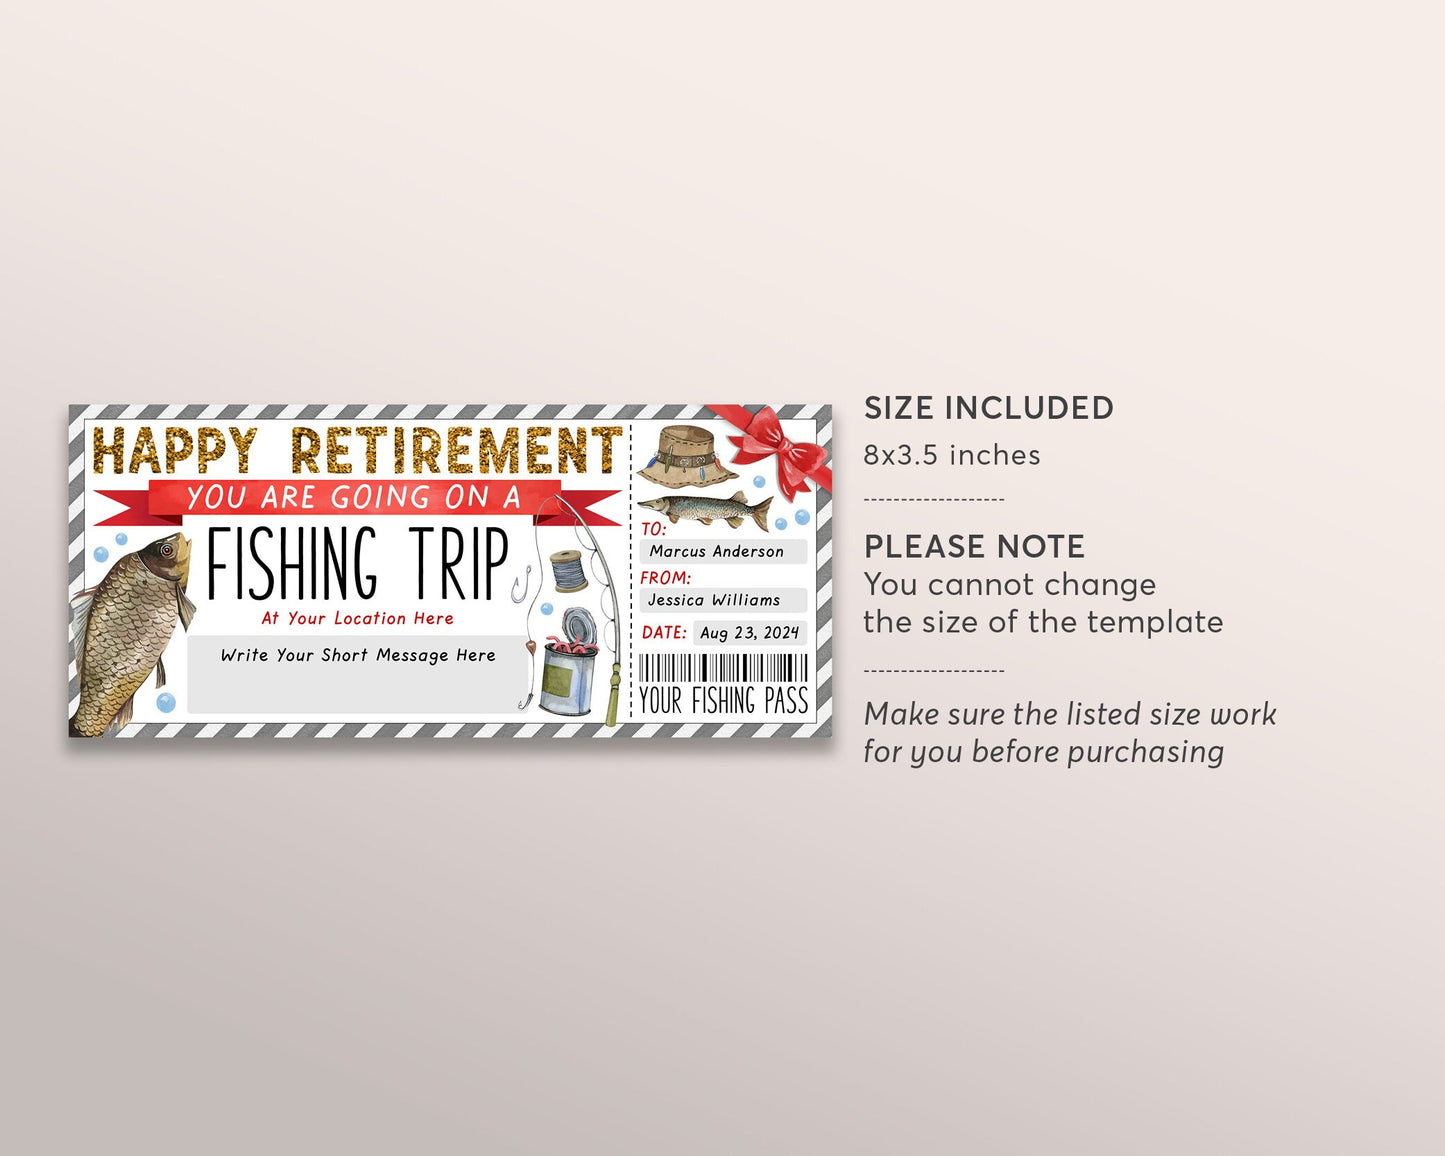 Retirement Fishing Trip Ticket Editable Template, Fishing Trip Reveal Gift Certificate For Retiree, Fishing Day Trip Voucher Coupon